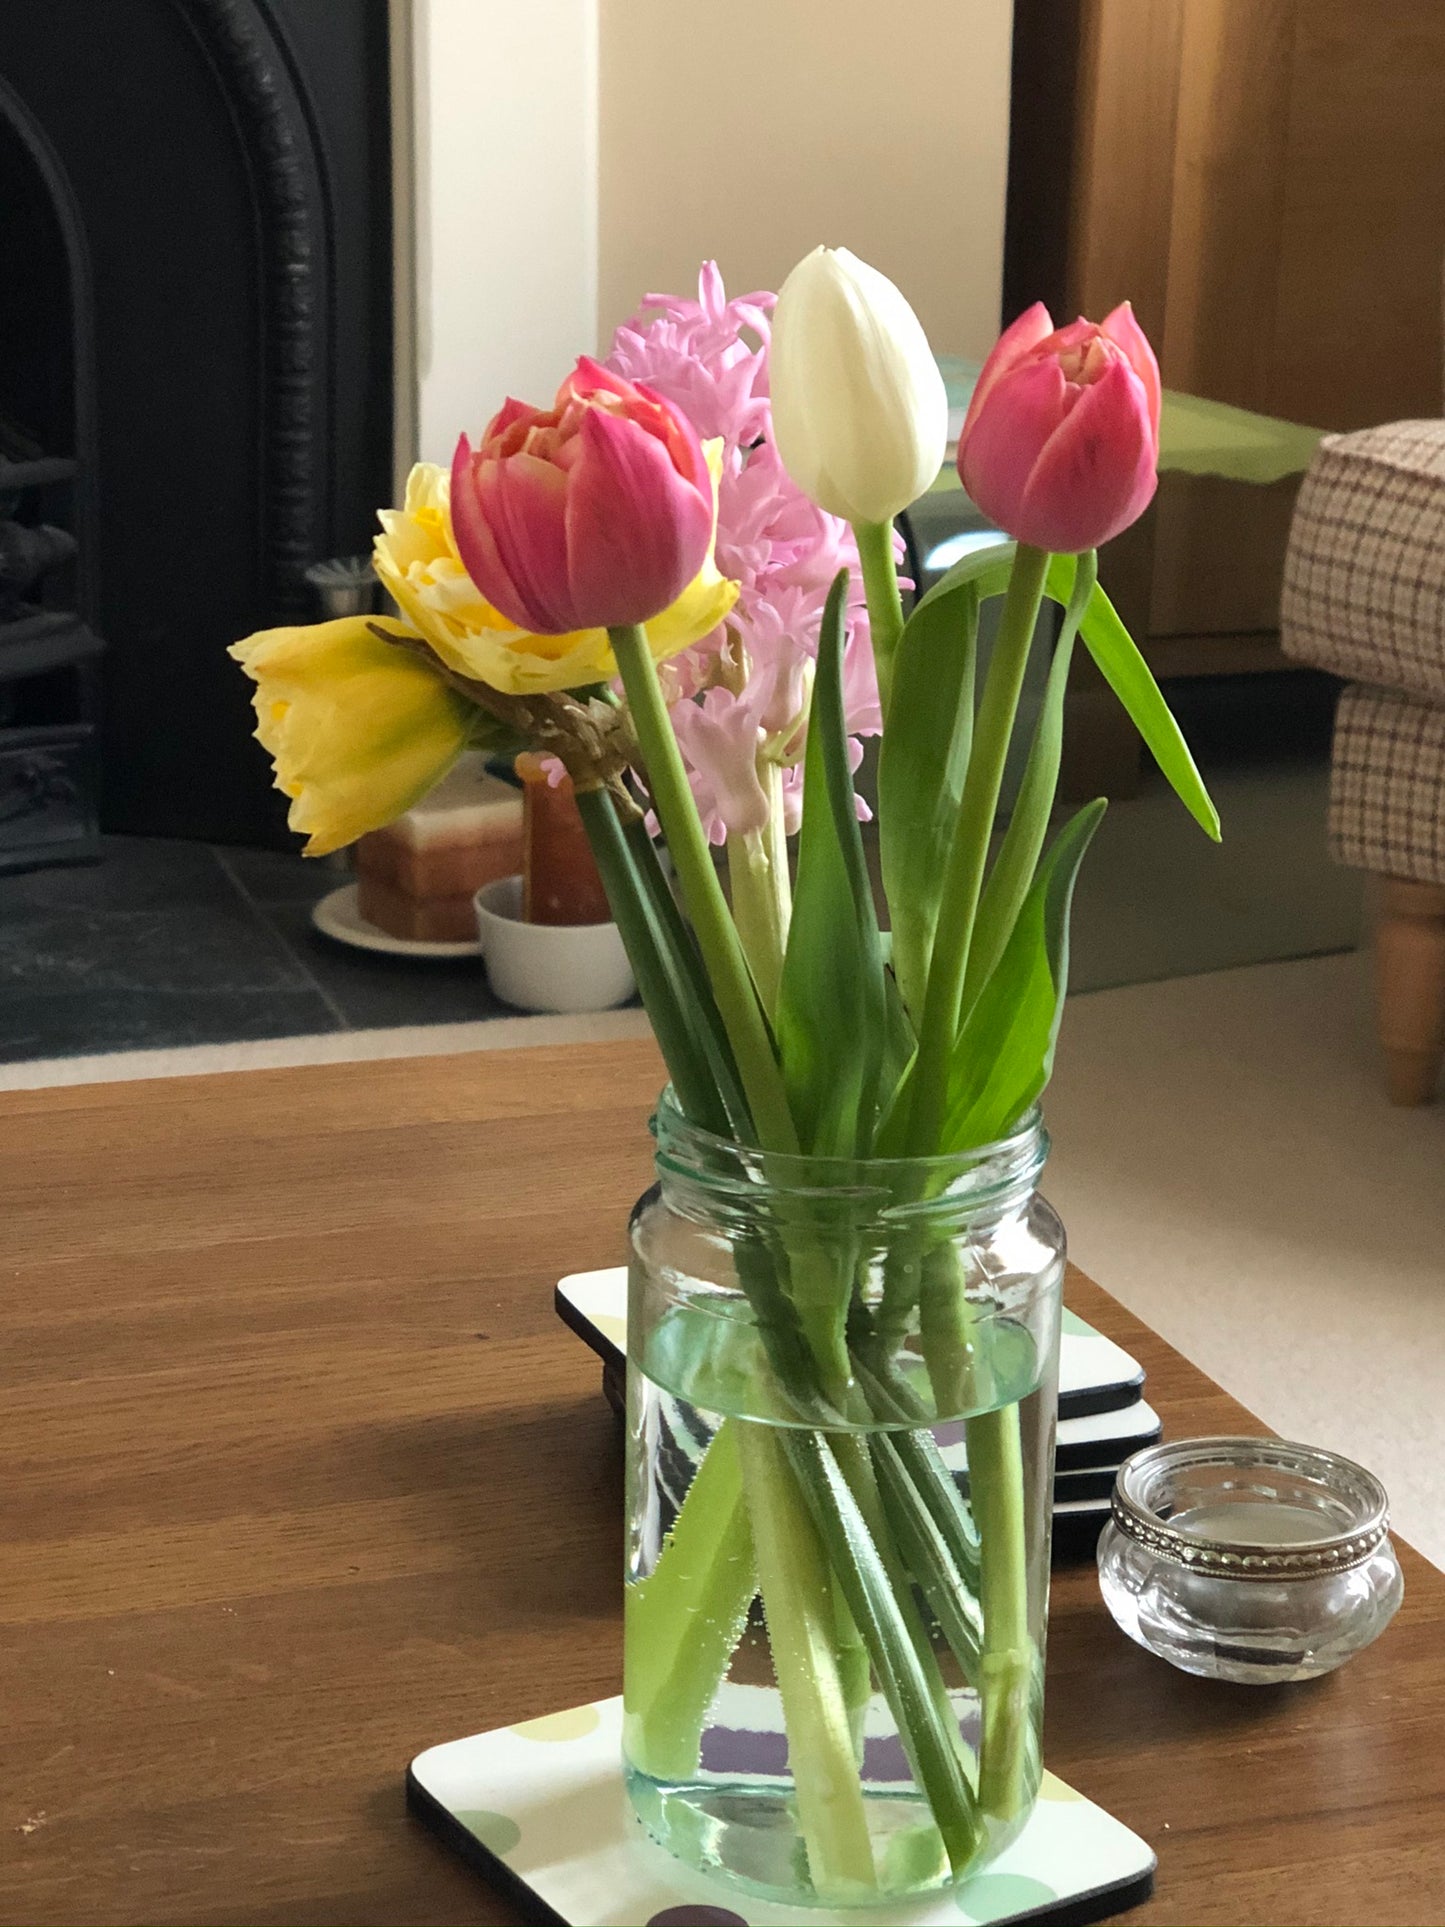 Tulips and Daffodils in a Jar